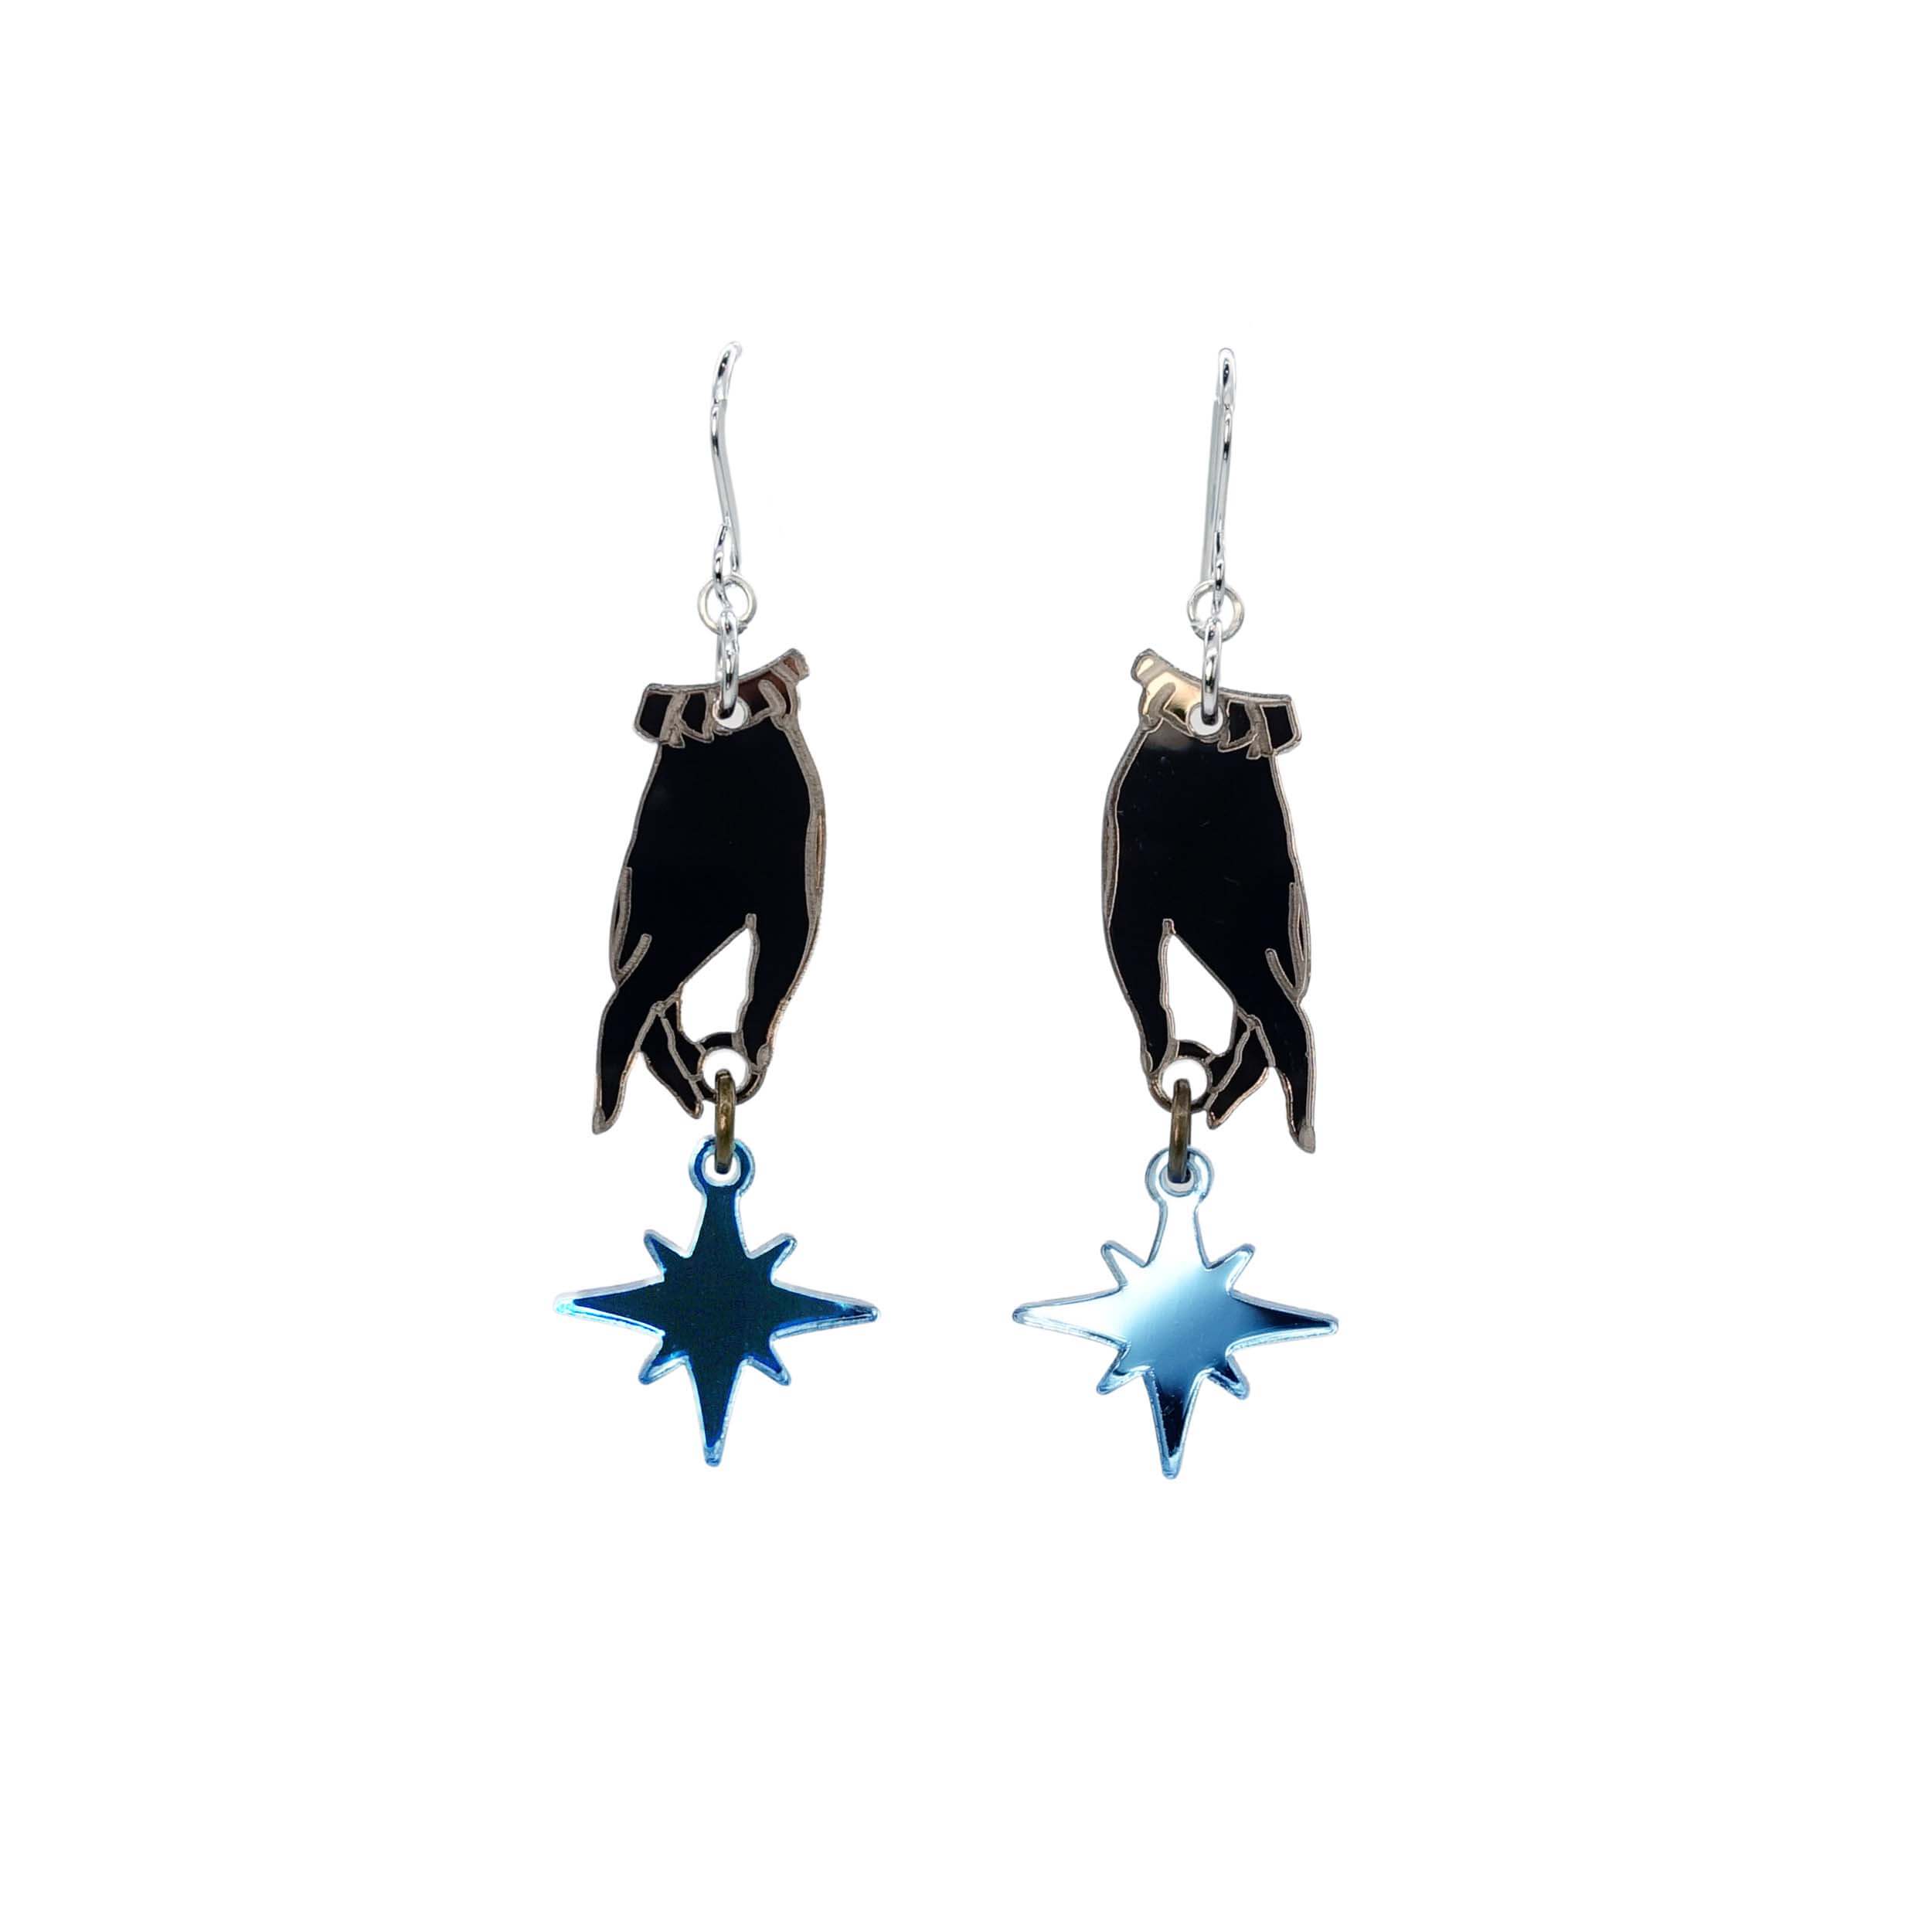 Dreams and Stars earrings from the Brontë Collection, designed by Sarah Day in collaboration with the Brontë Parsonage Museum. 